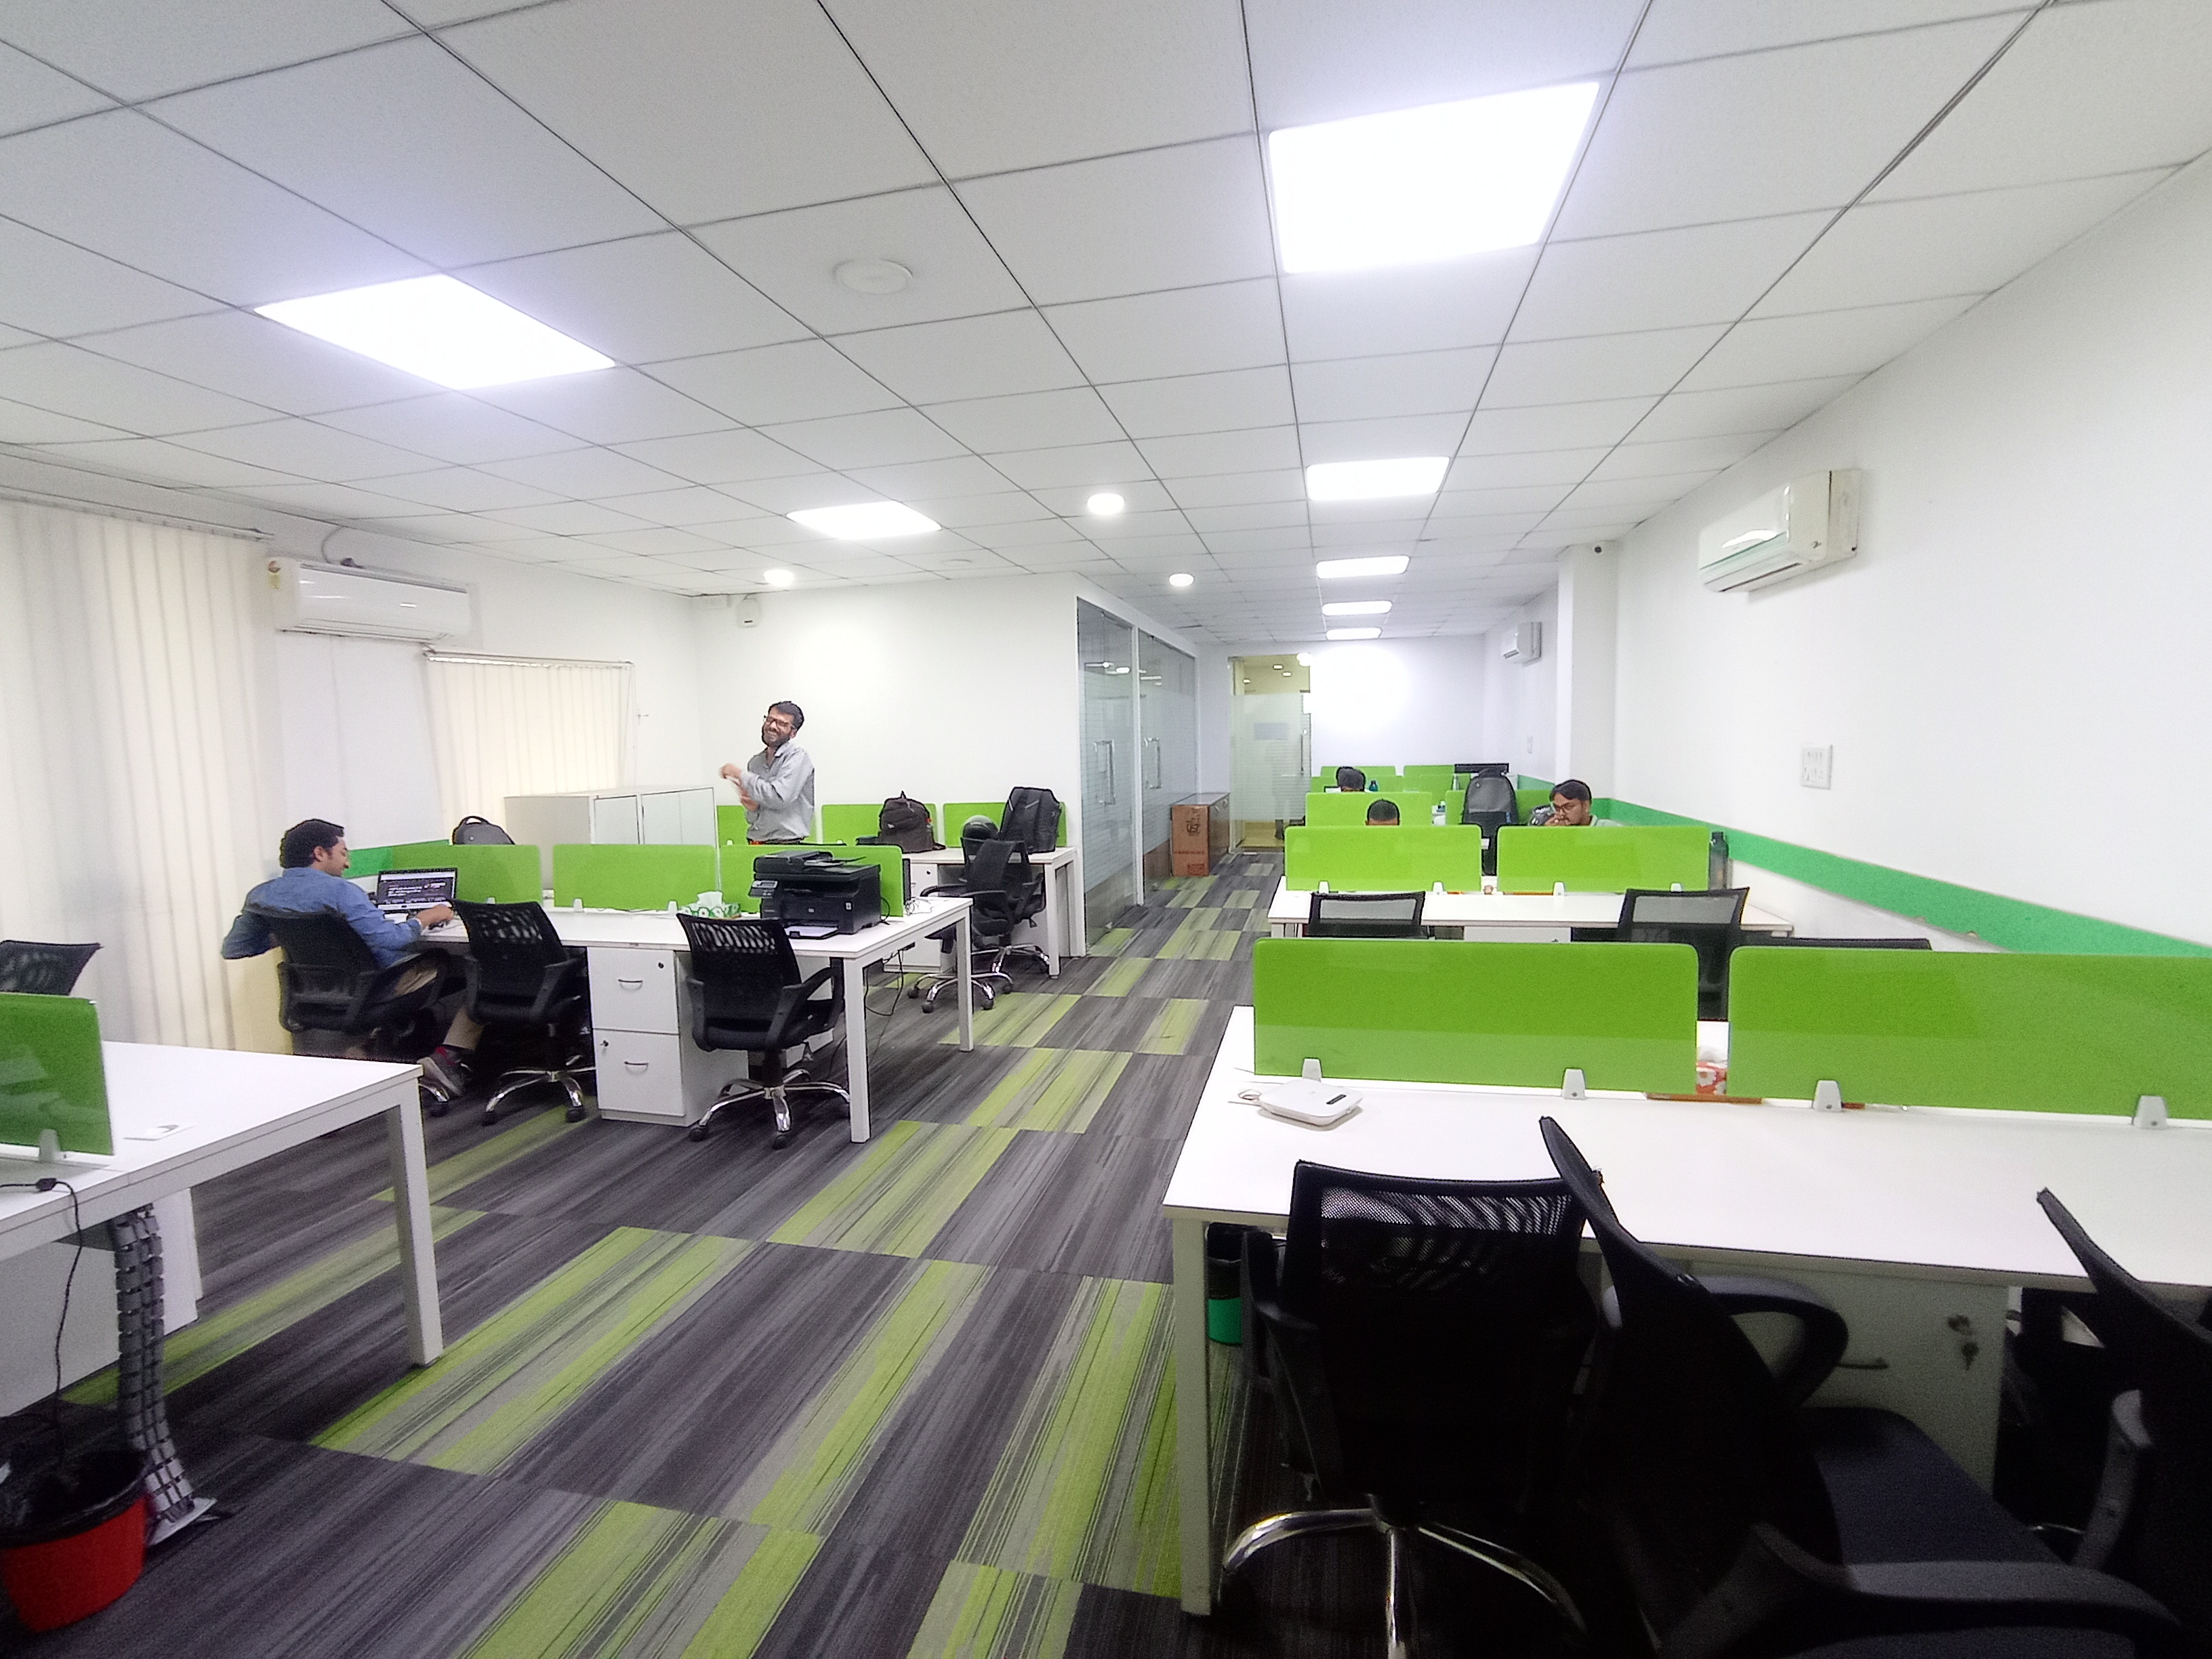 FULLY FURNISHED SPACE WITH PLUG N PLAY FACILITY